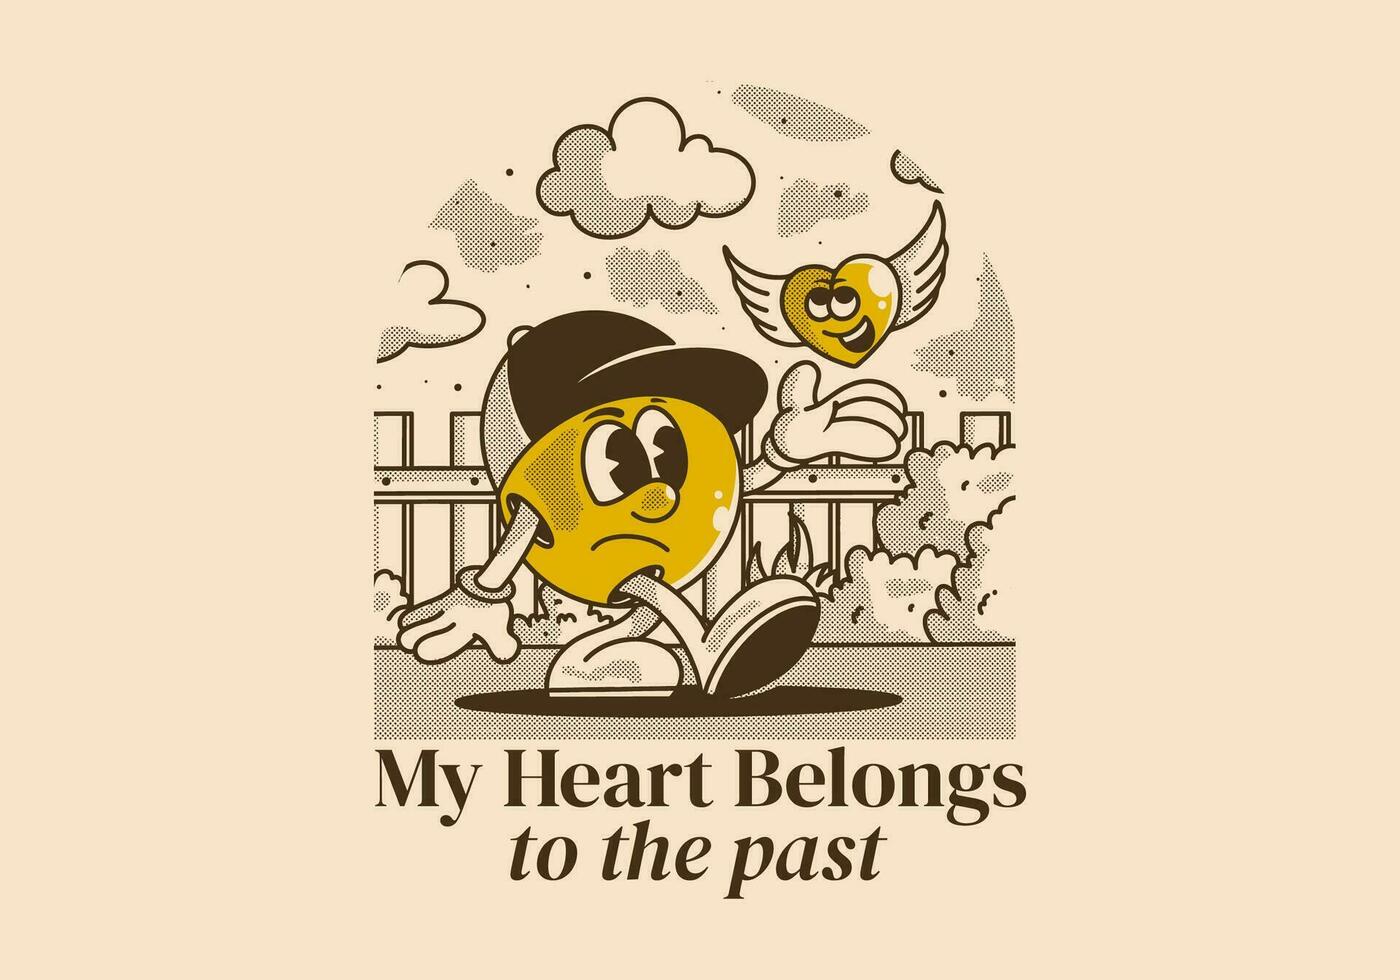 My heart belong to the past. Character illustration of a ball head and flying heart vector